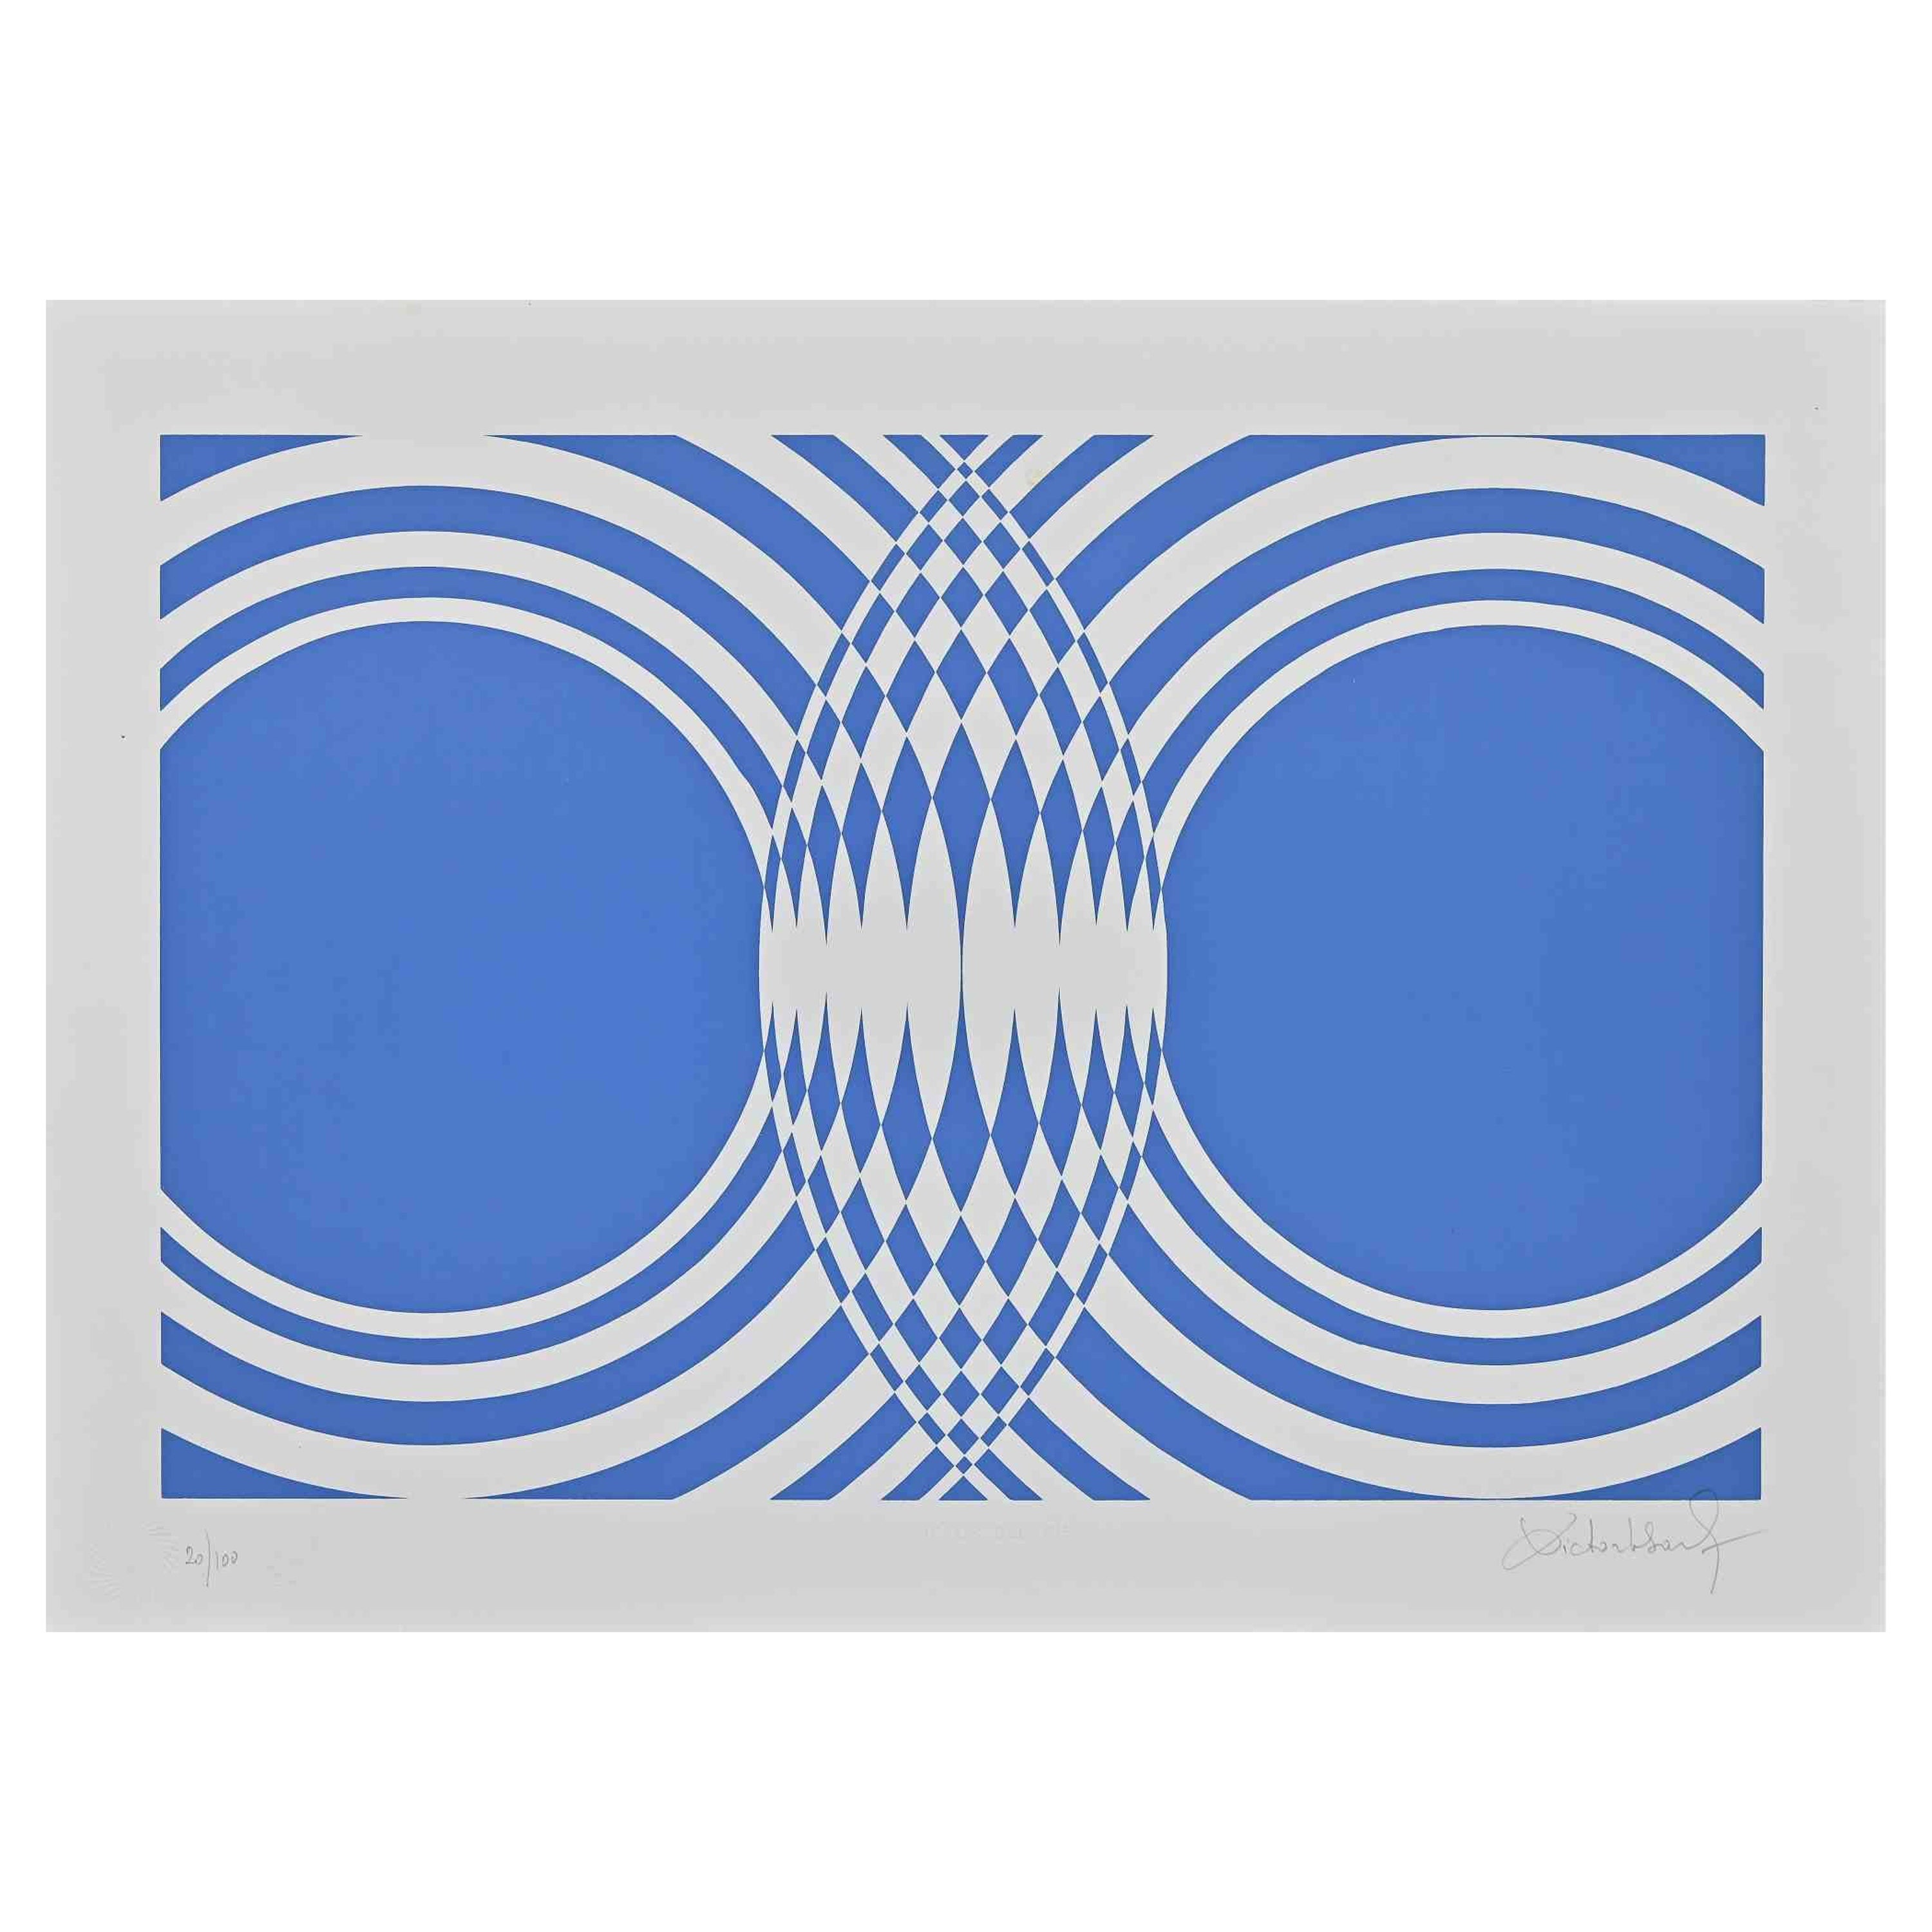 Blue Composition is an original contemporary artwork realized by Victor Debach in the 1970s.

Mixed colored screen print on paper.

Hand signed on the lower right margin.

Numbered on the lower left.

Edition of 20/100
